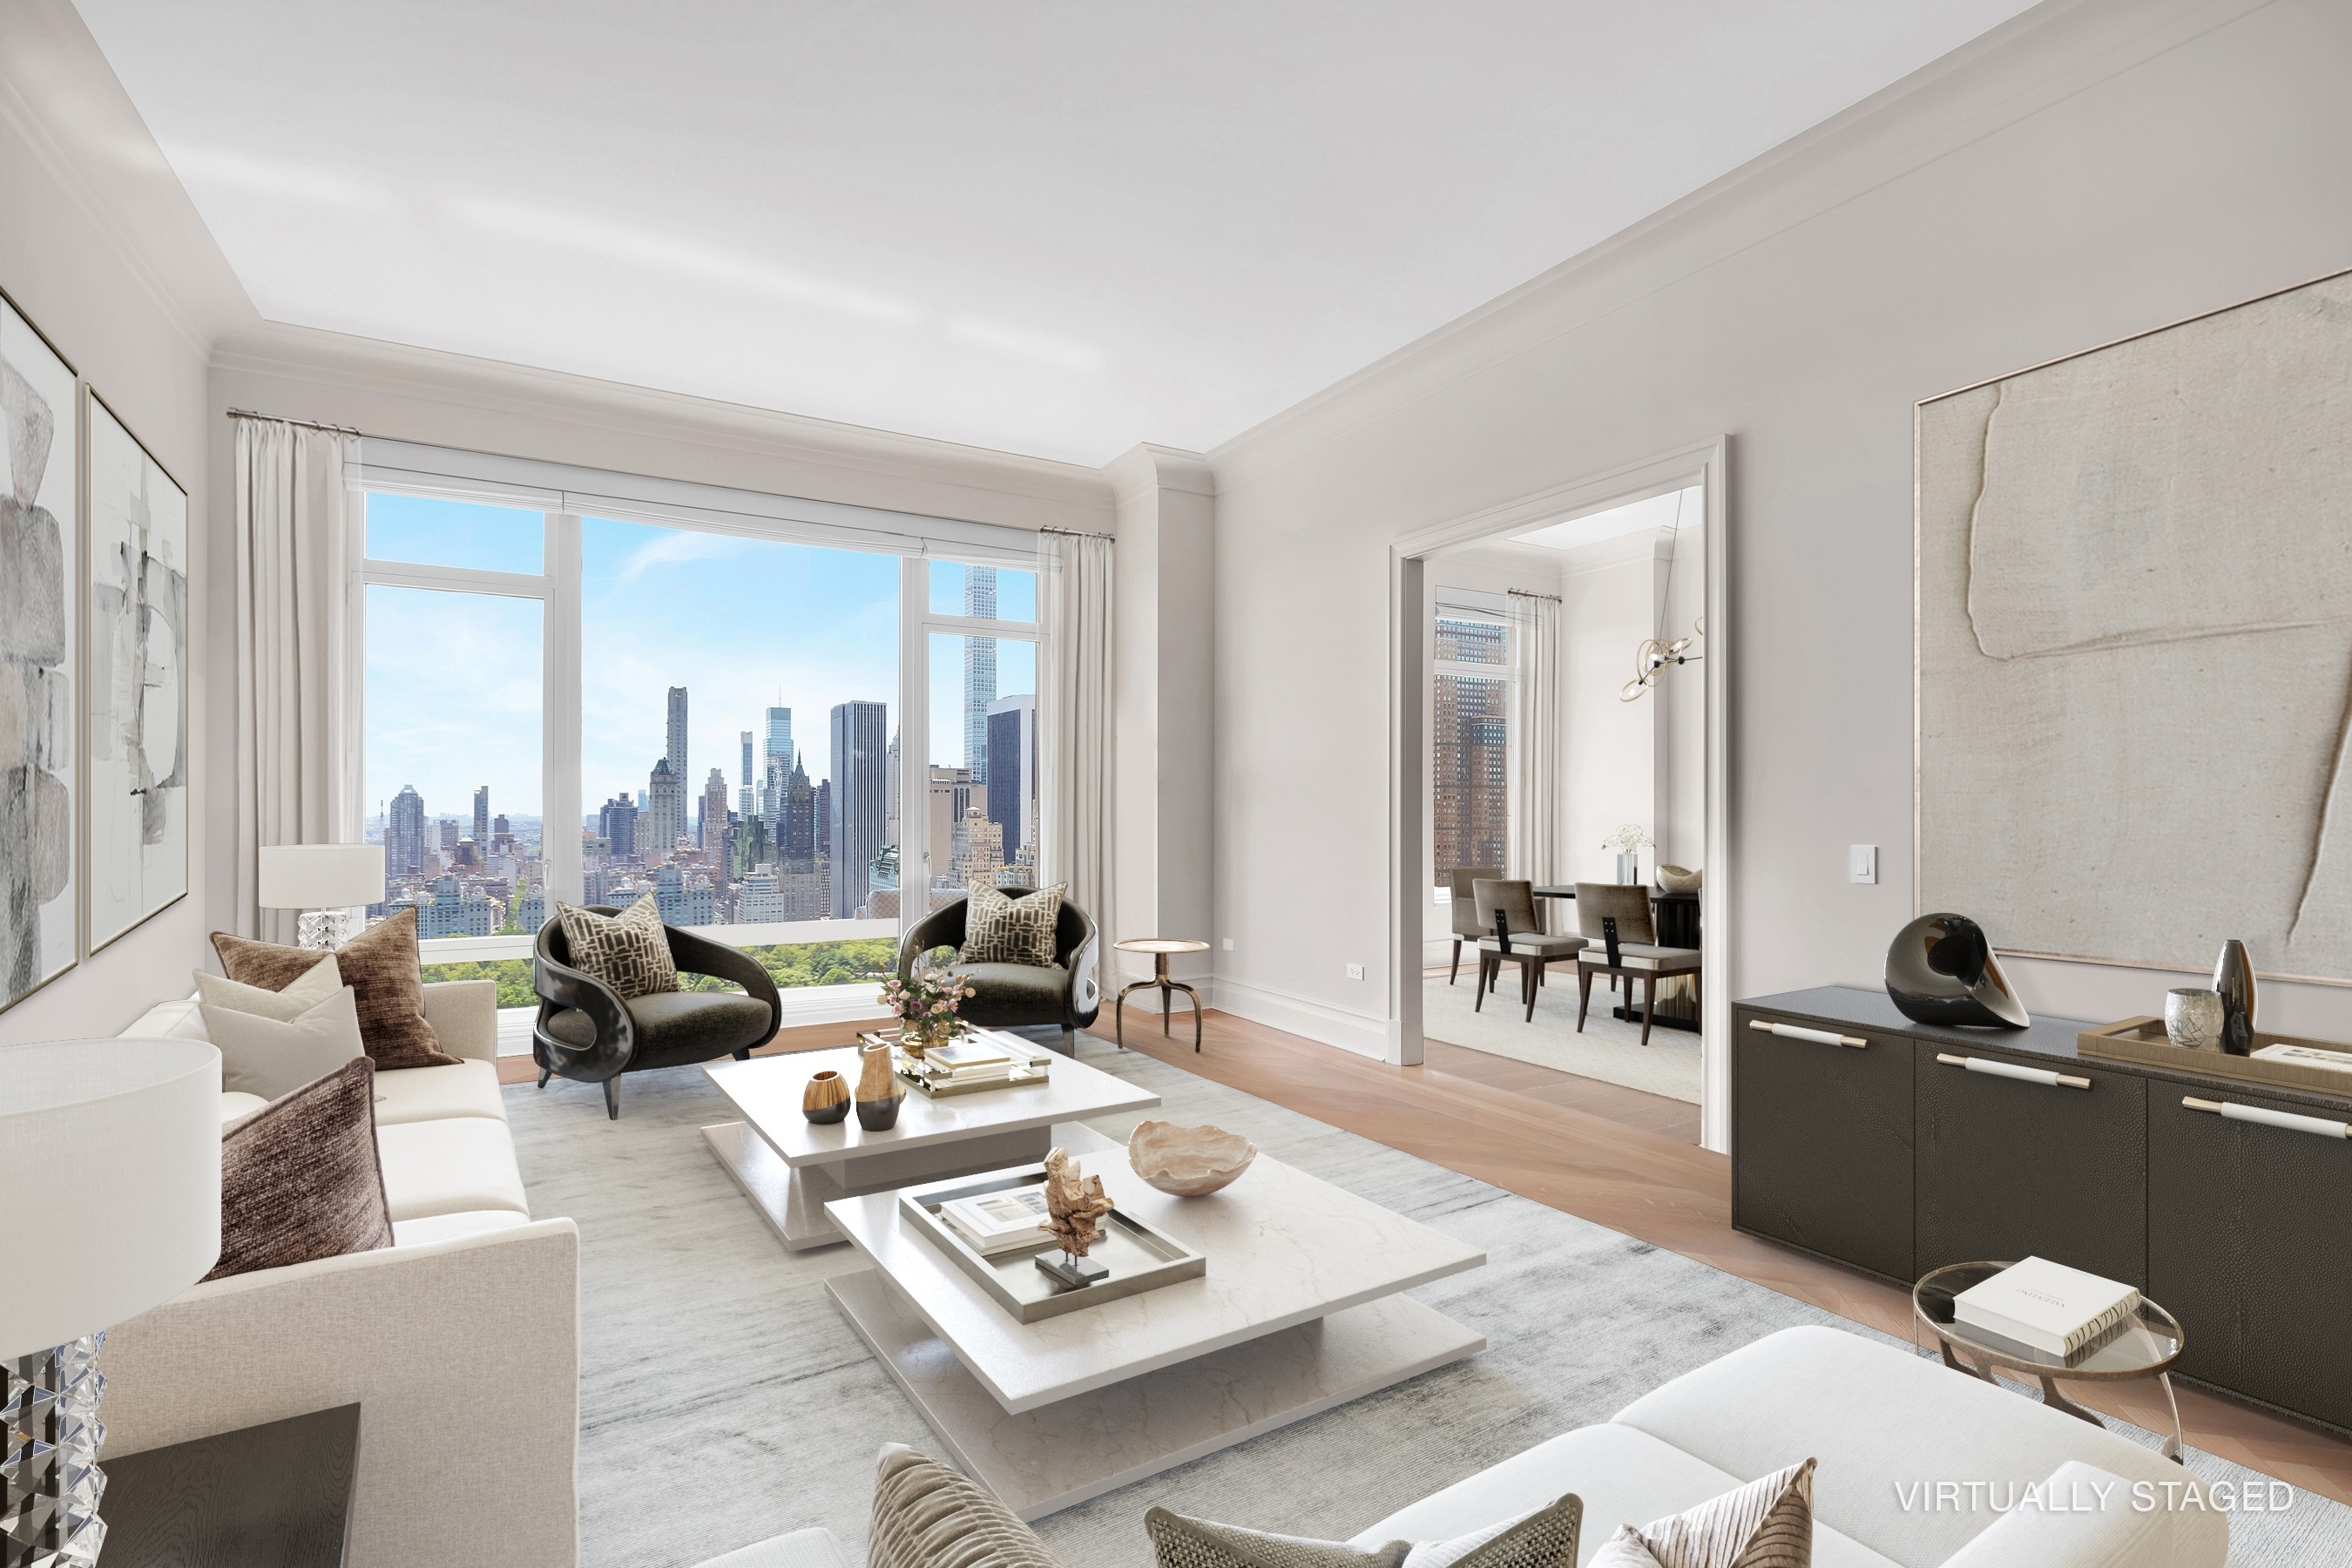 Condominium for Sale at 15 Cpw, 15 CENTRAL PARK W, 33C Lincoln Square, New York, New York 10023